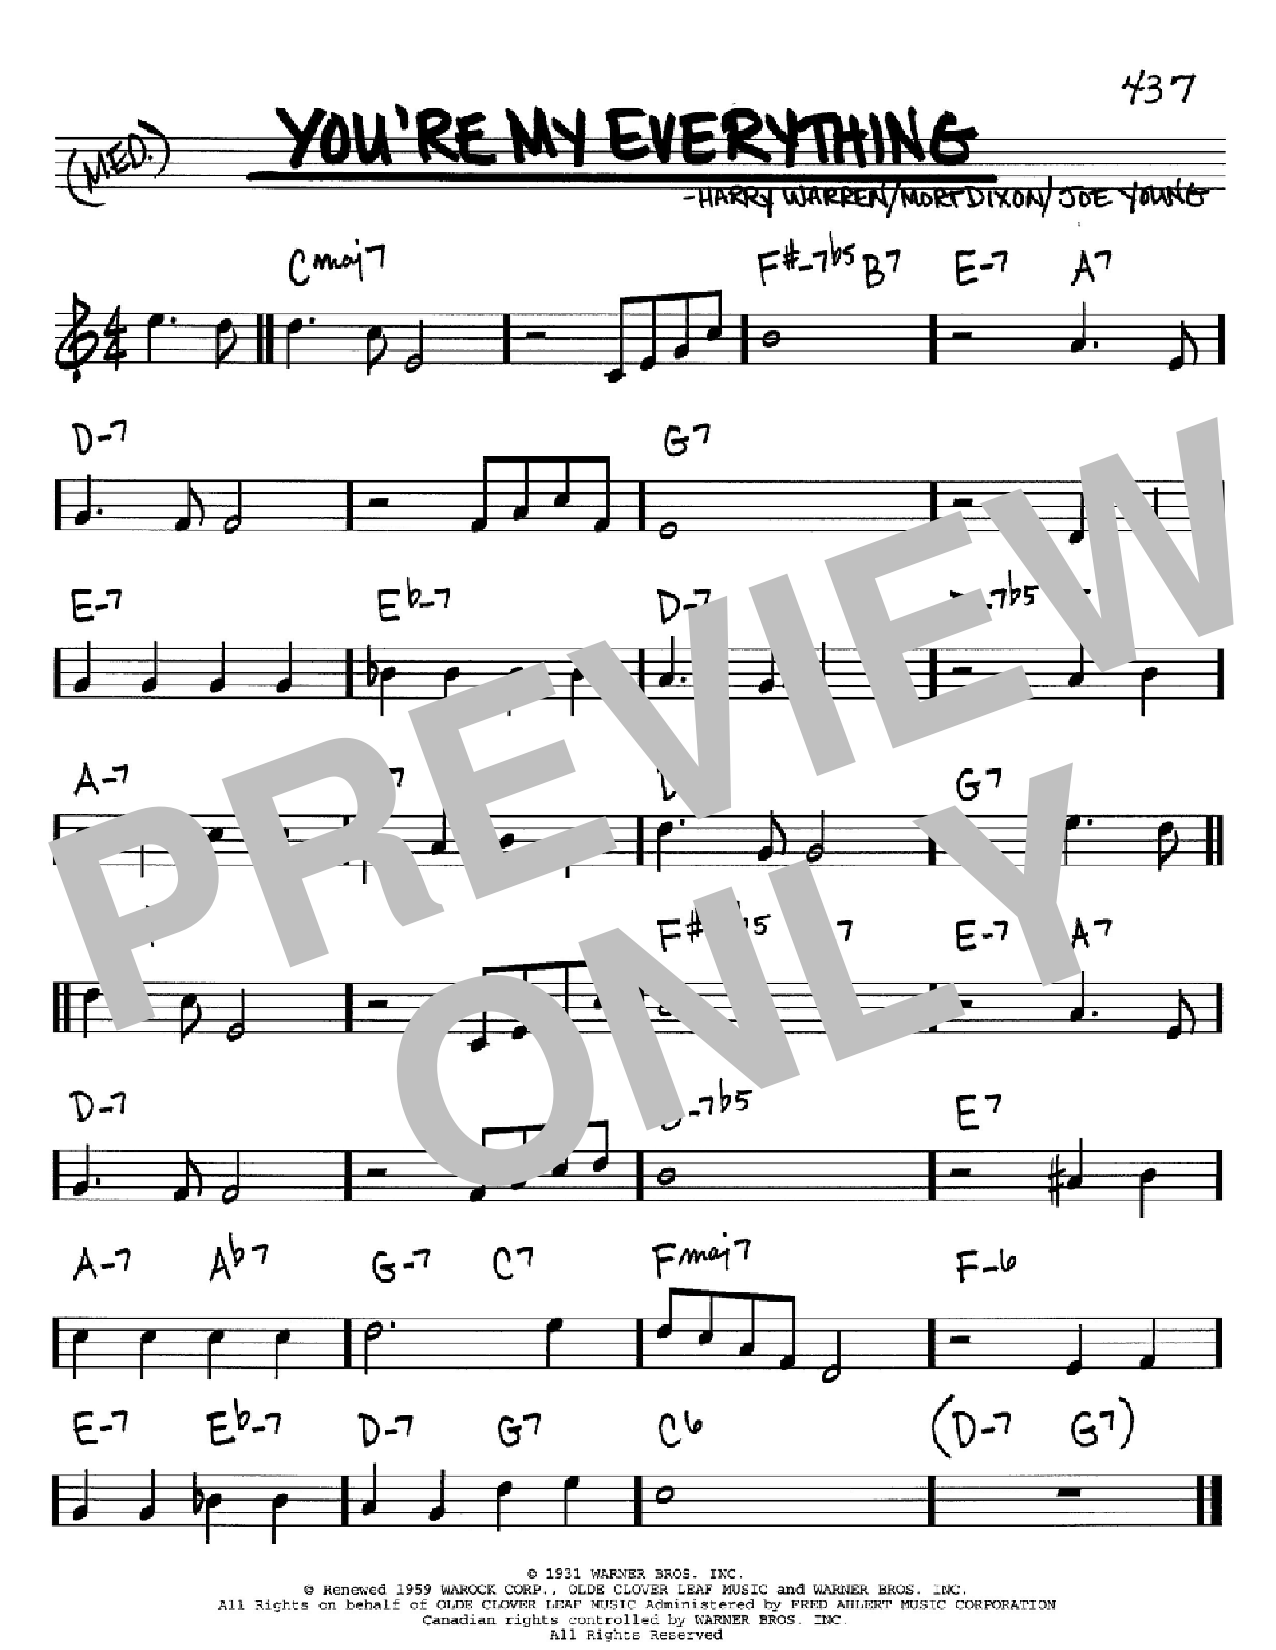 Mort Dixon You're My Everything sheet music notes and chords. Download Printable PDF.